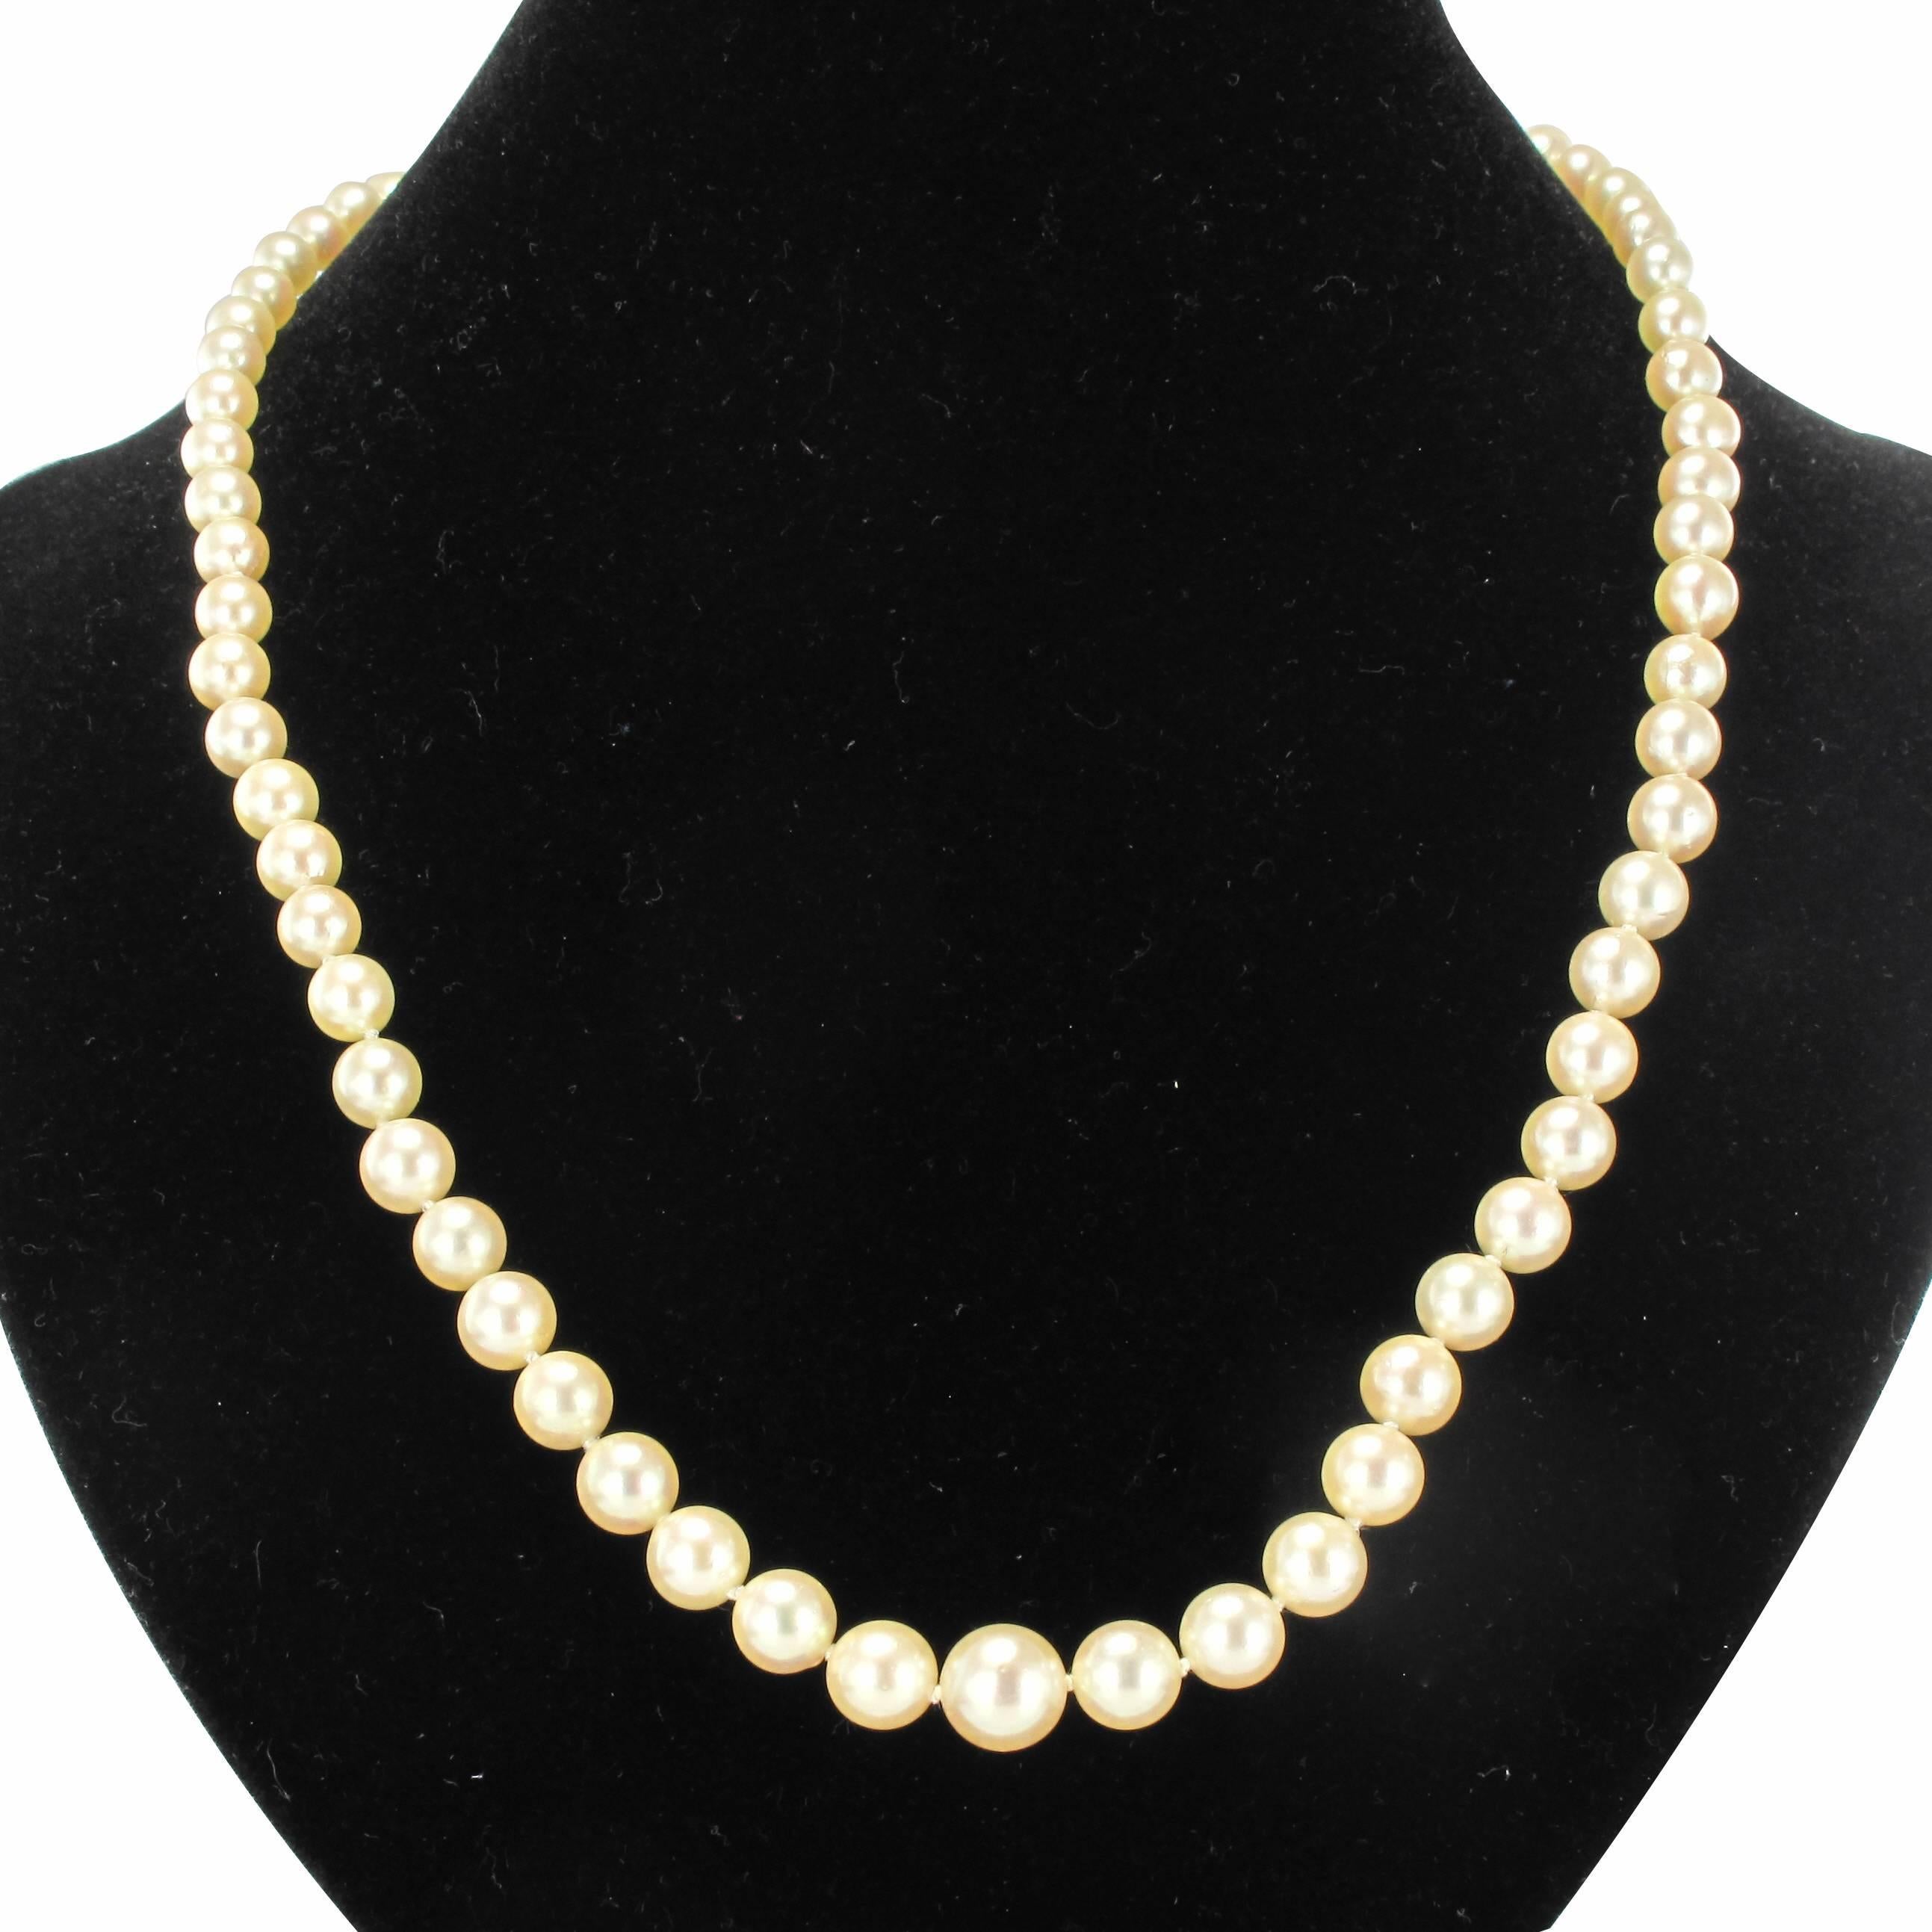 This pearl necklace is composed of a strand of Japanese cultured pearls which are held together by a rectangular chiselled 18K yellow gold clasp with eagle head hallmark. 

Diameter of the pearls 4.5 / 5 mm to 8 / 8.5 mm.
Length: 53.5 cm.
Total